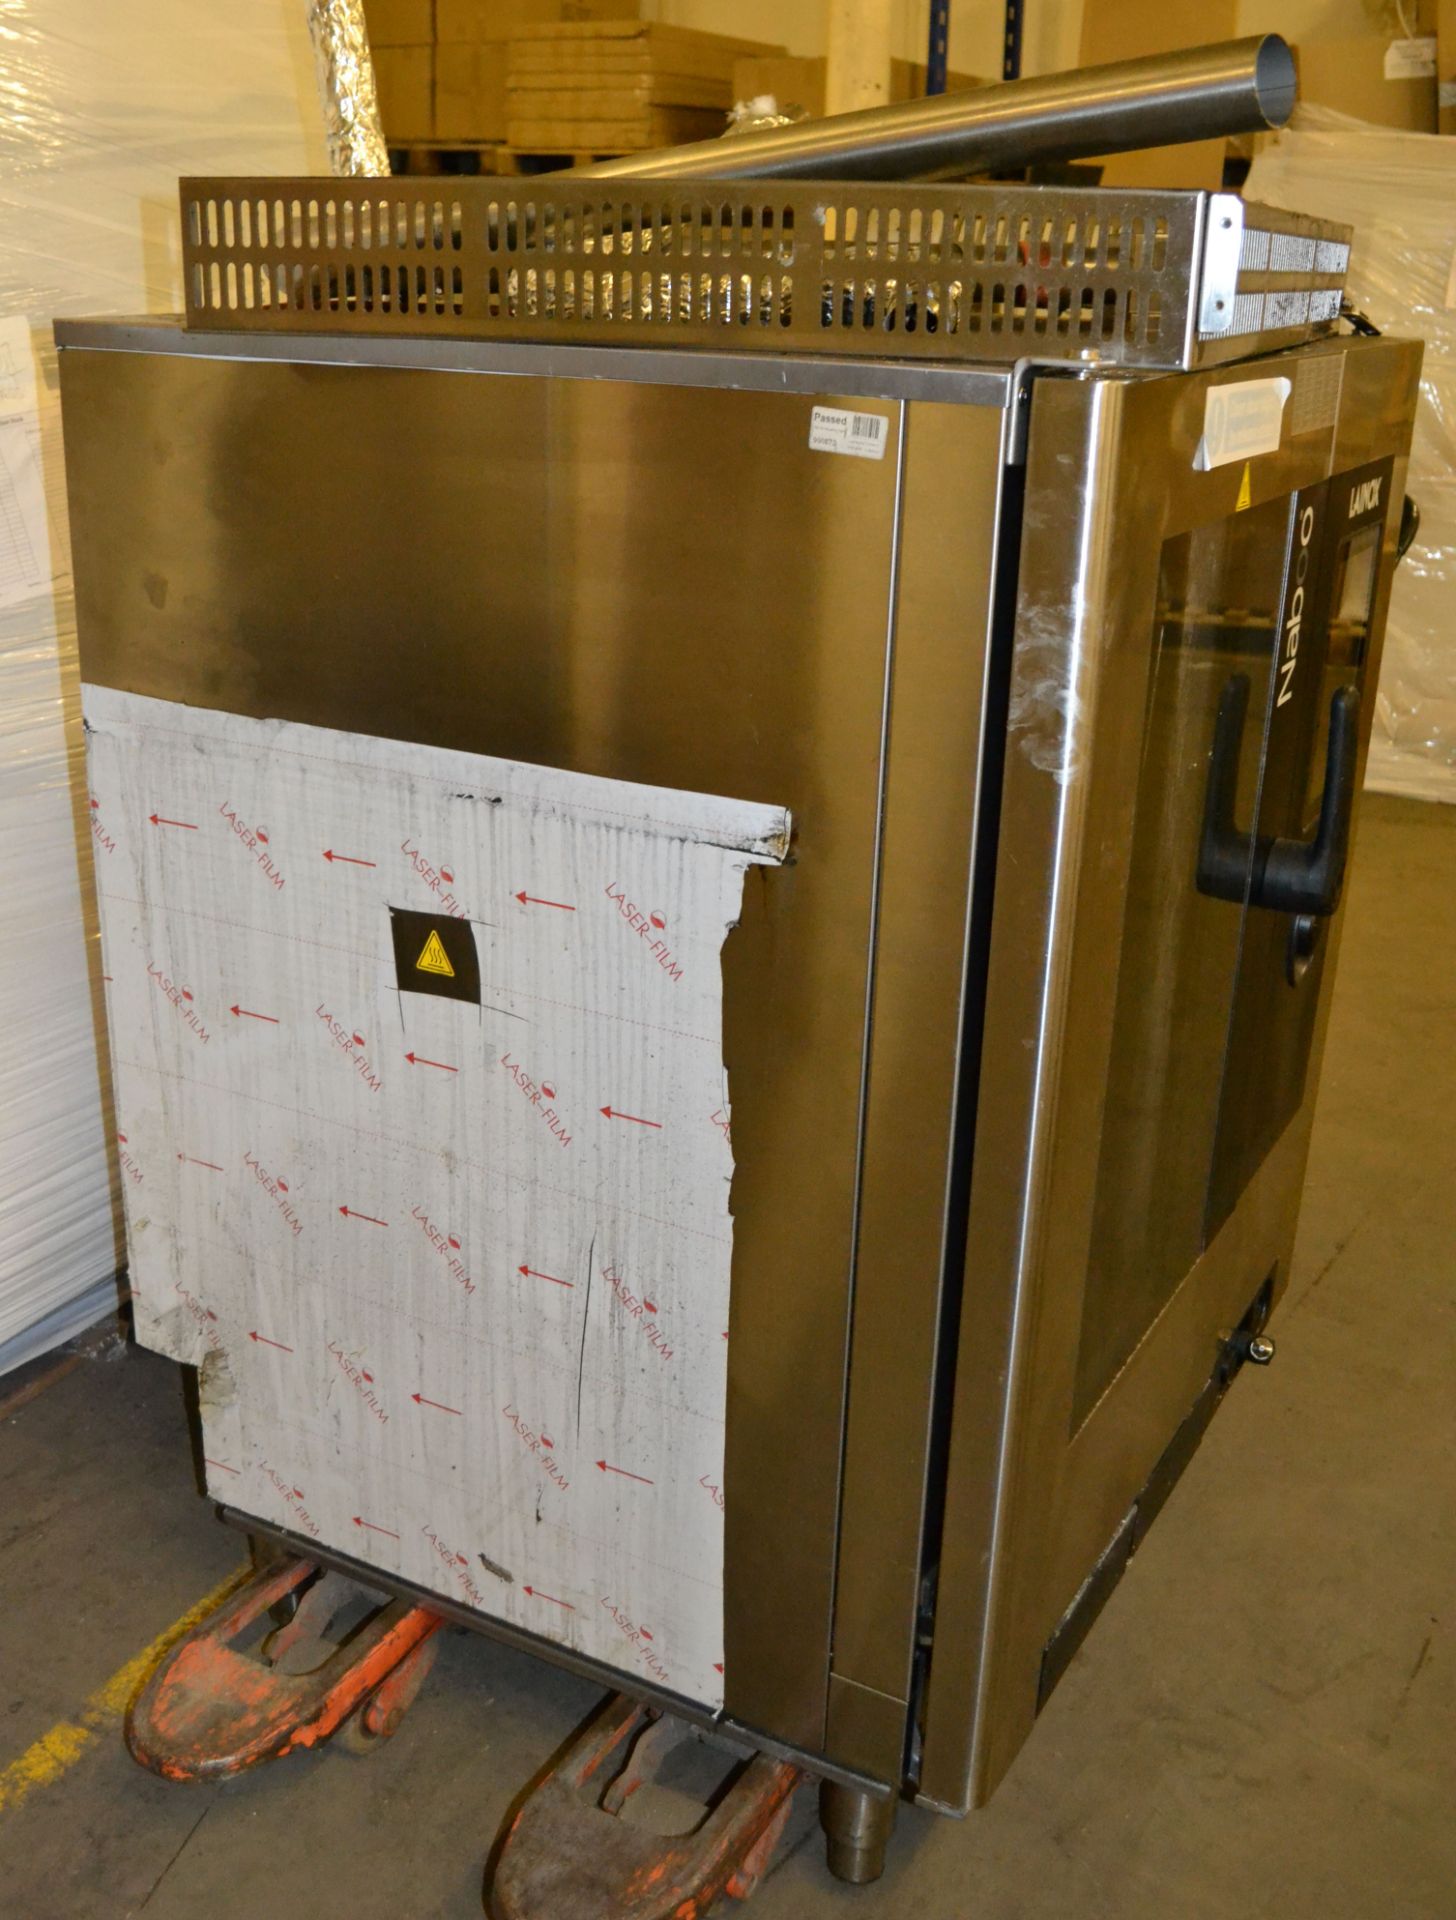 1 x Lainox Naboo NAGB101 Gas Combination Oven RRP £15,600 - Ref:NCE021 - CL007 - Location: Bolton - Image 3 of 8